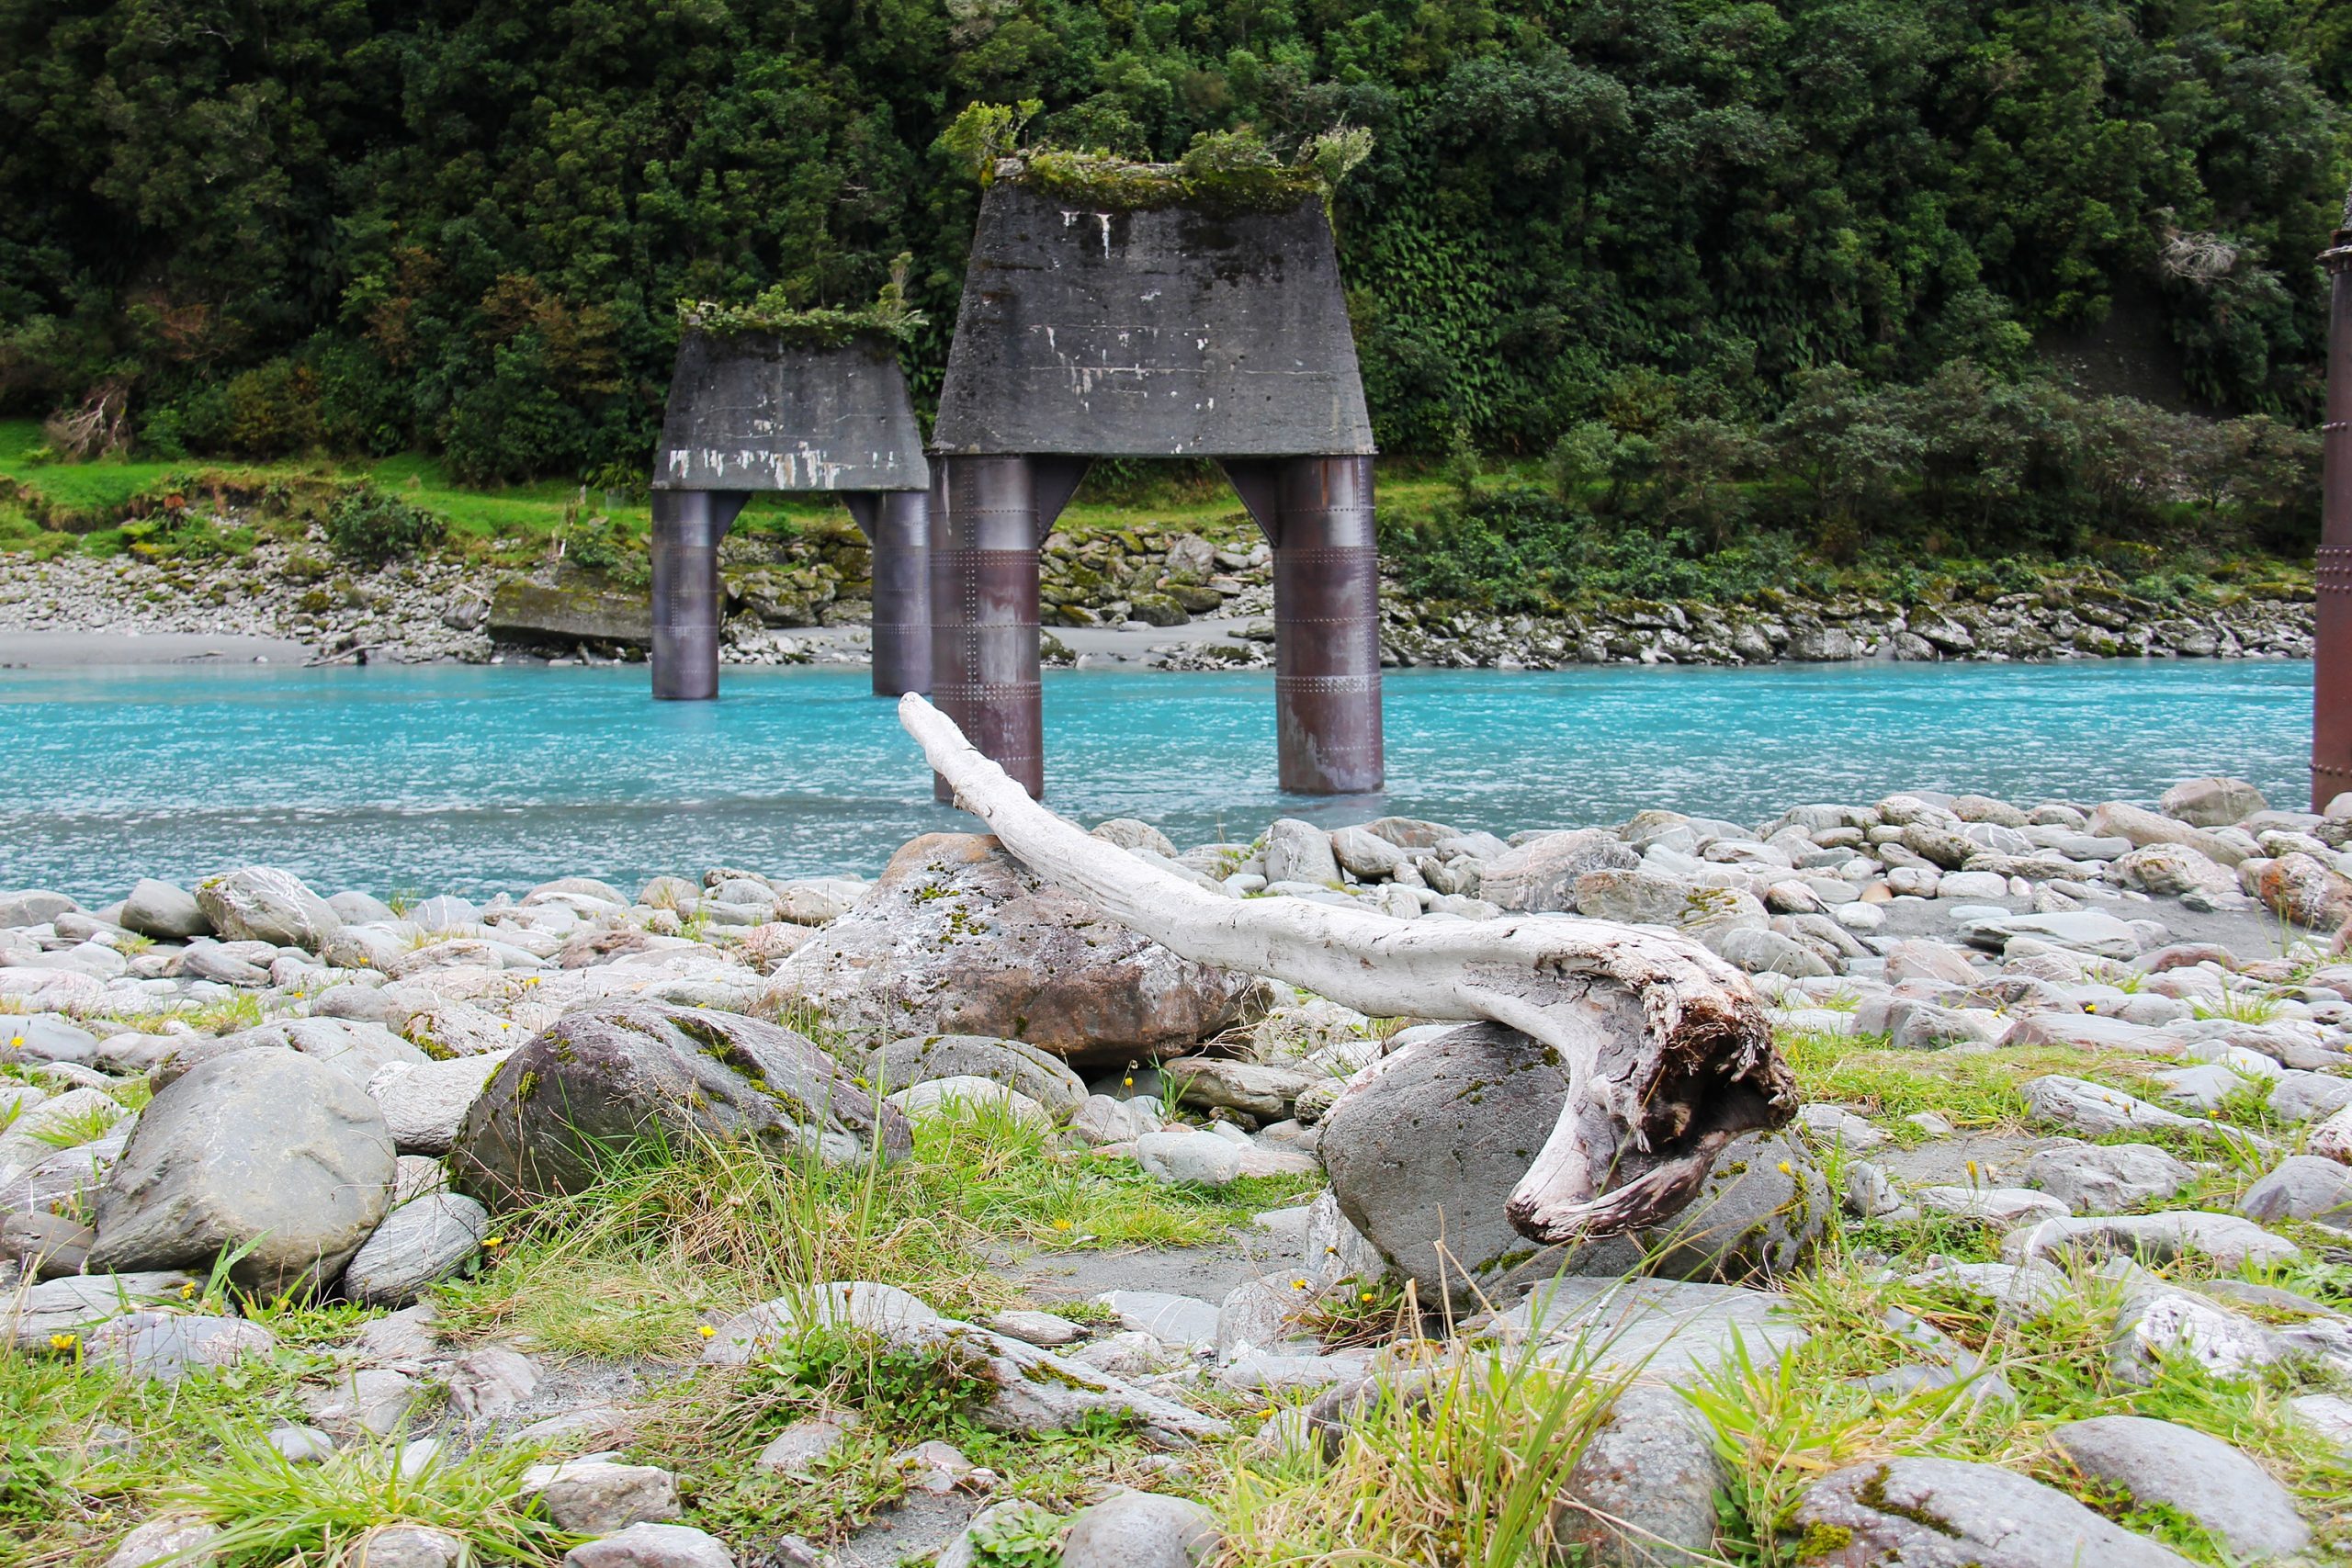 10 Days – SOUTH ISLAND FLY FISHING ITINERARY